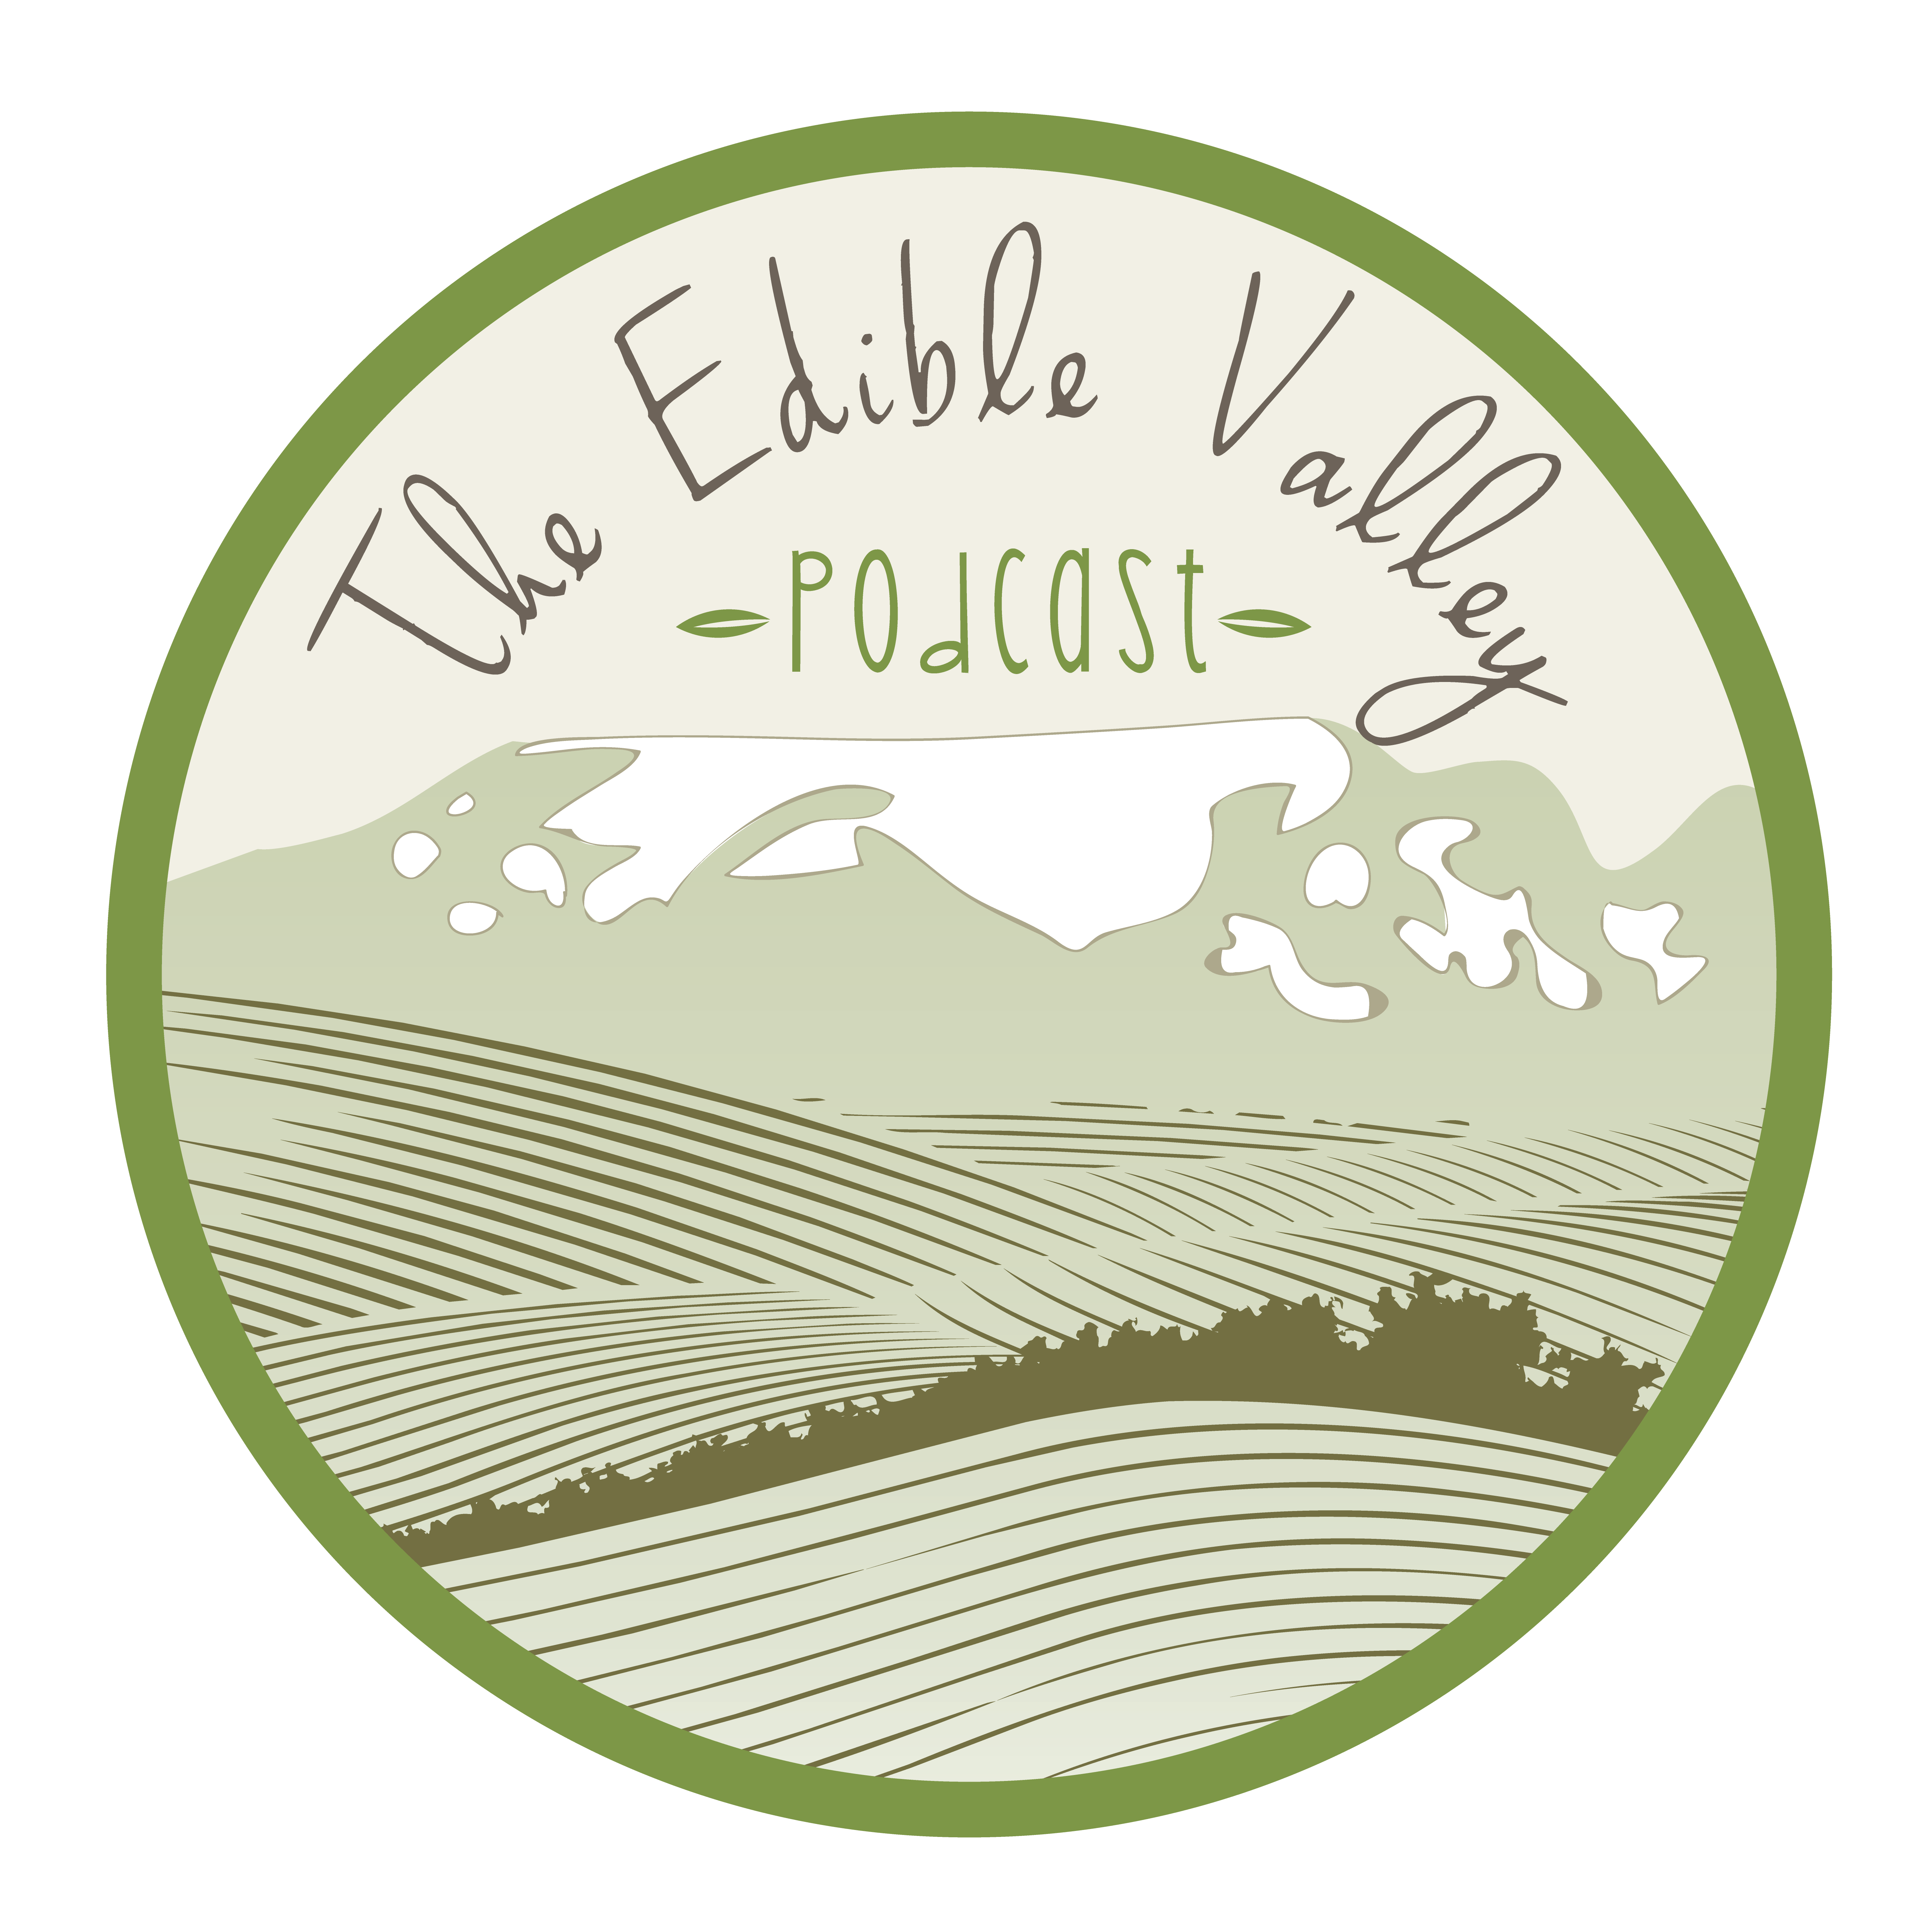 Episode 29: Update on Edible Valley